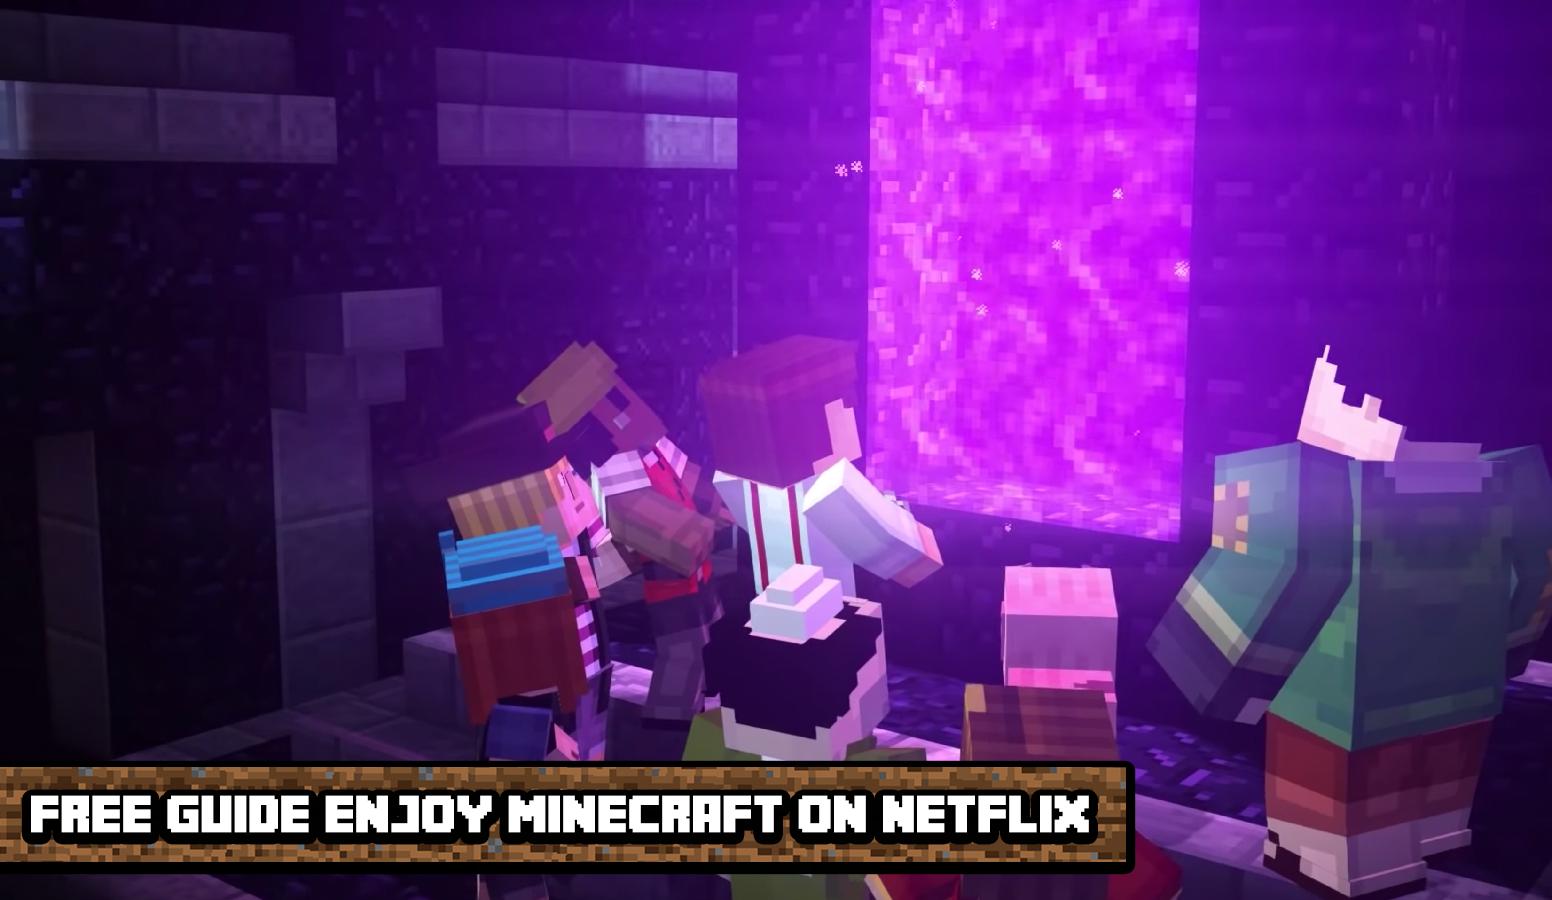 Minecraft Story Mode Full APK Android Game Free Download